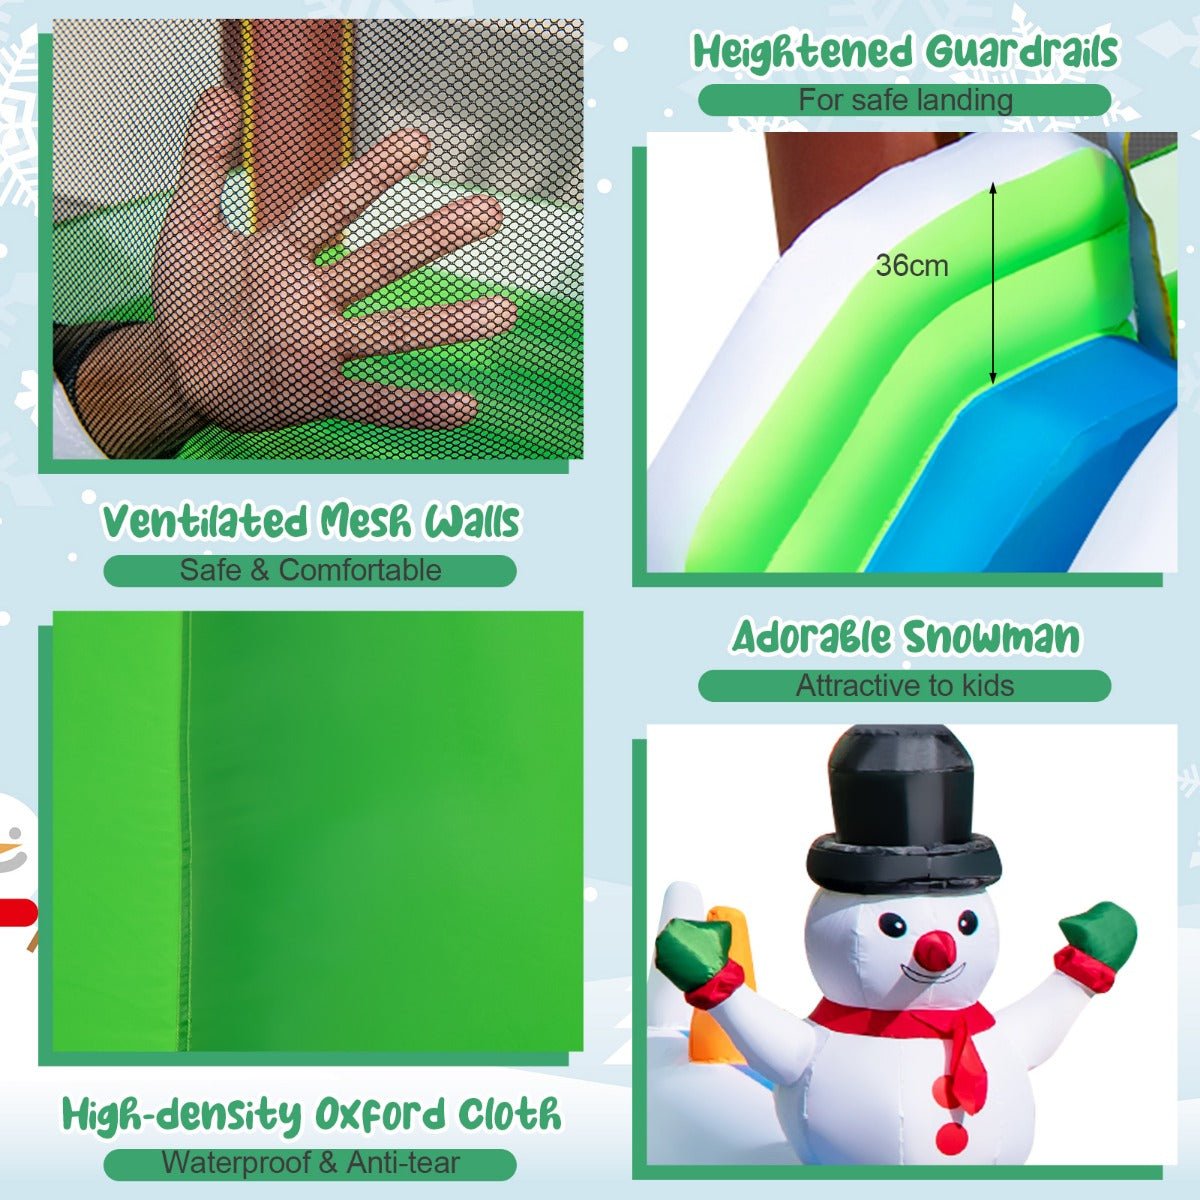 Snowman Jumping Castle - Create Magical Memories with Kids